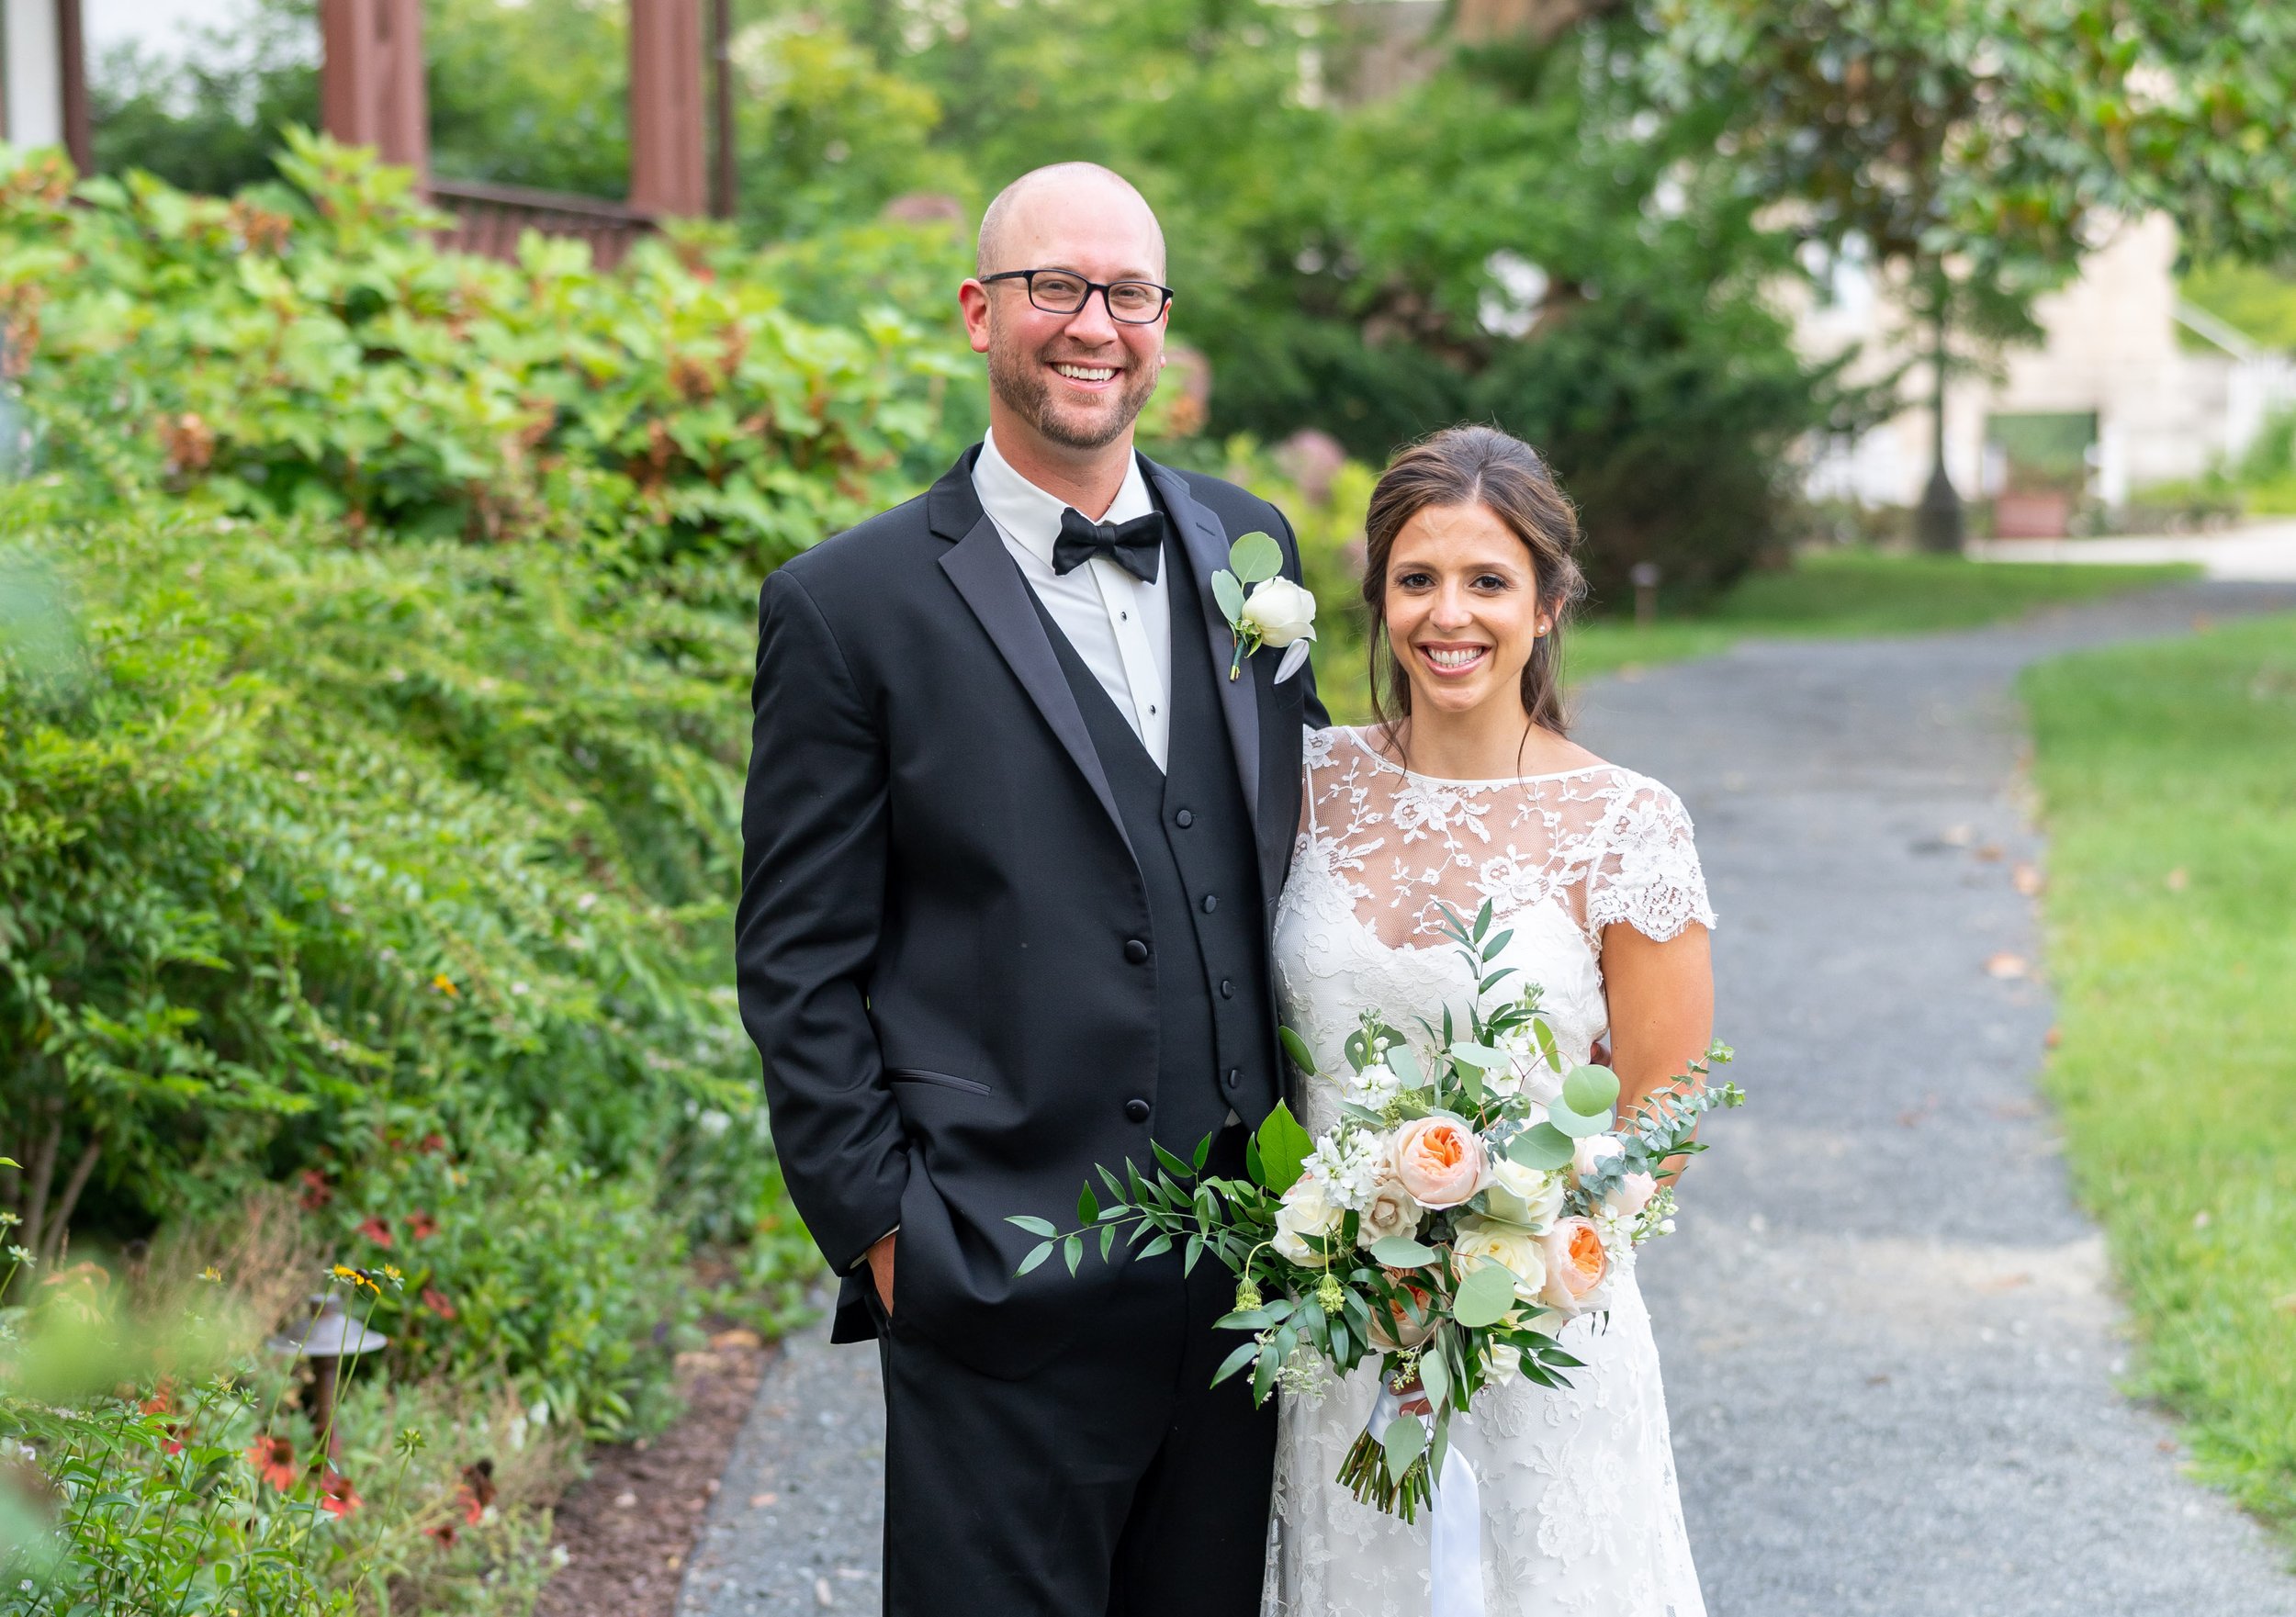 Fun wedding photographer in DC captures portraits at Lincolns Cottage